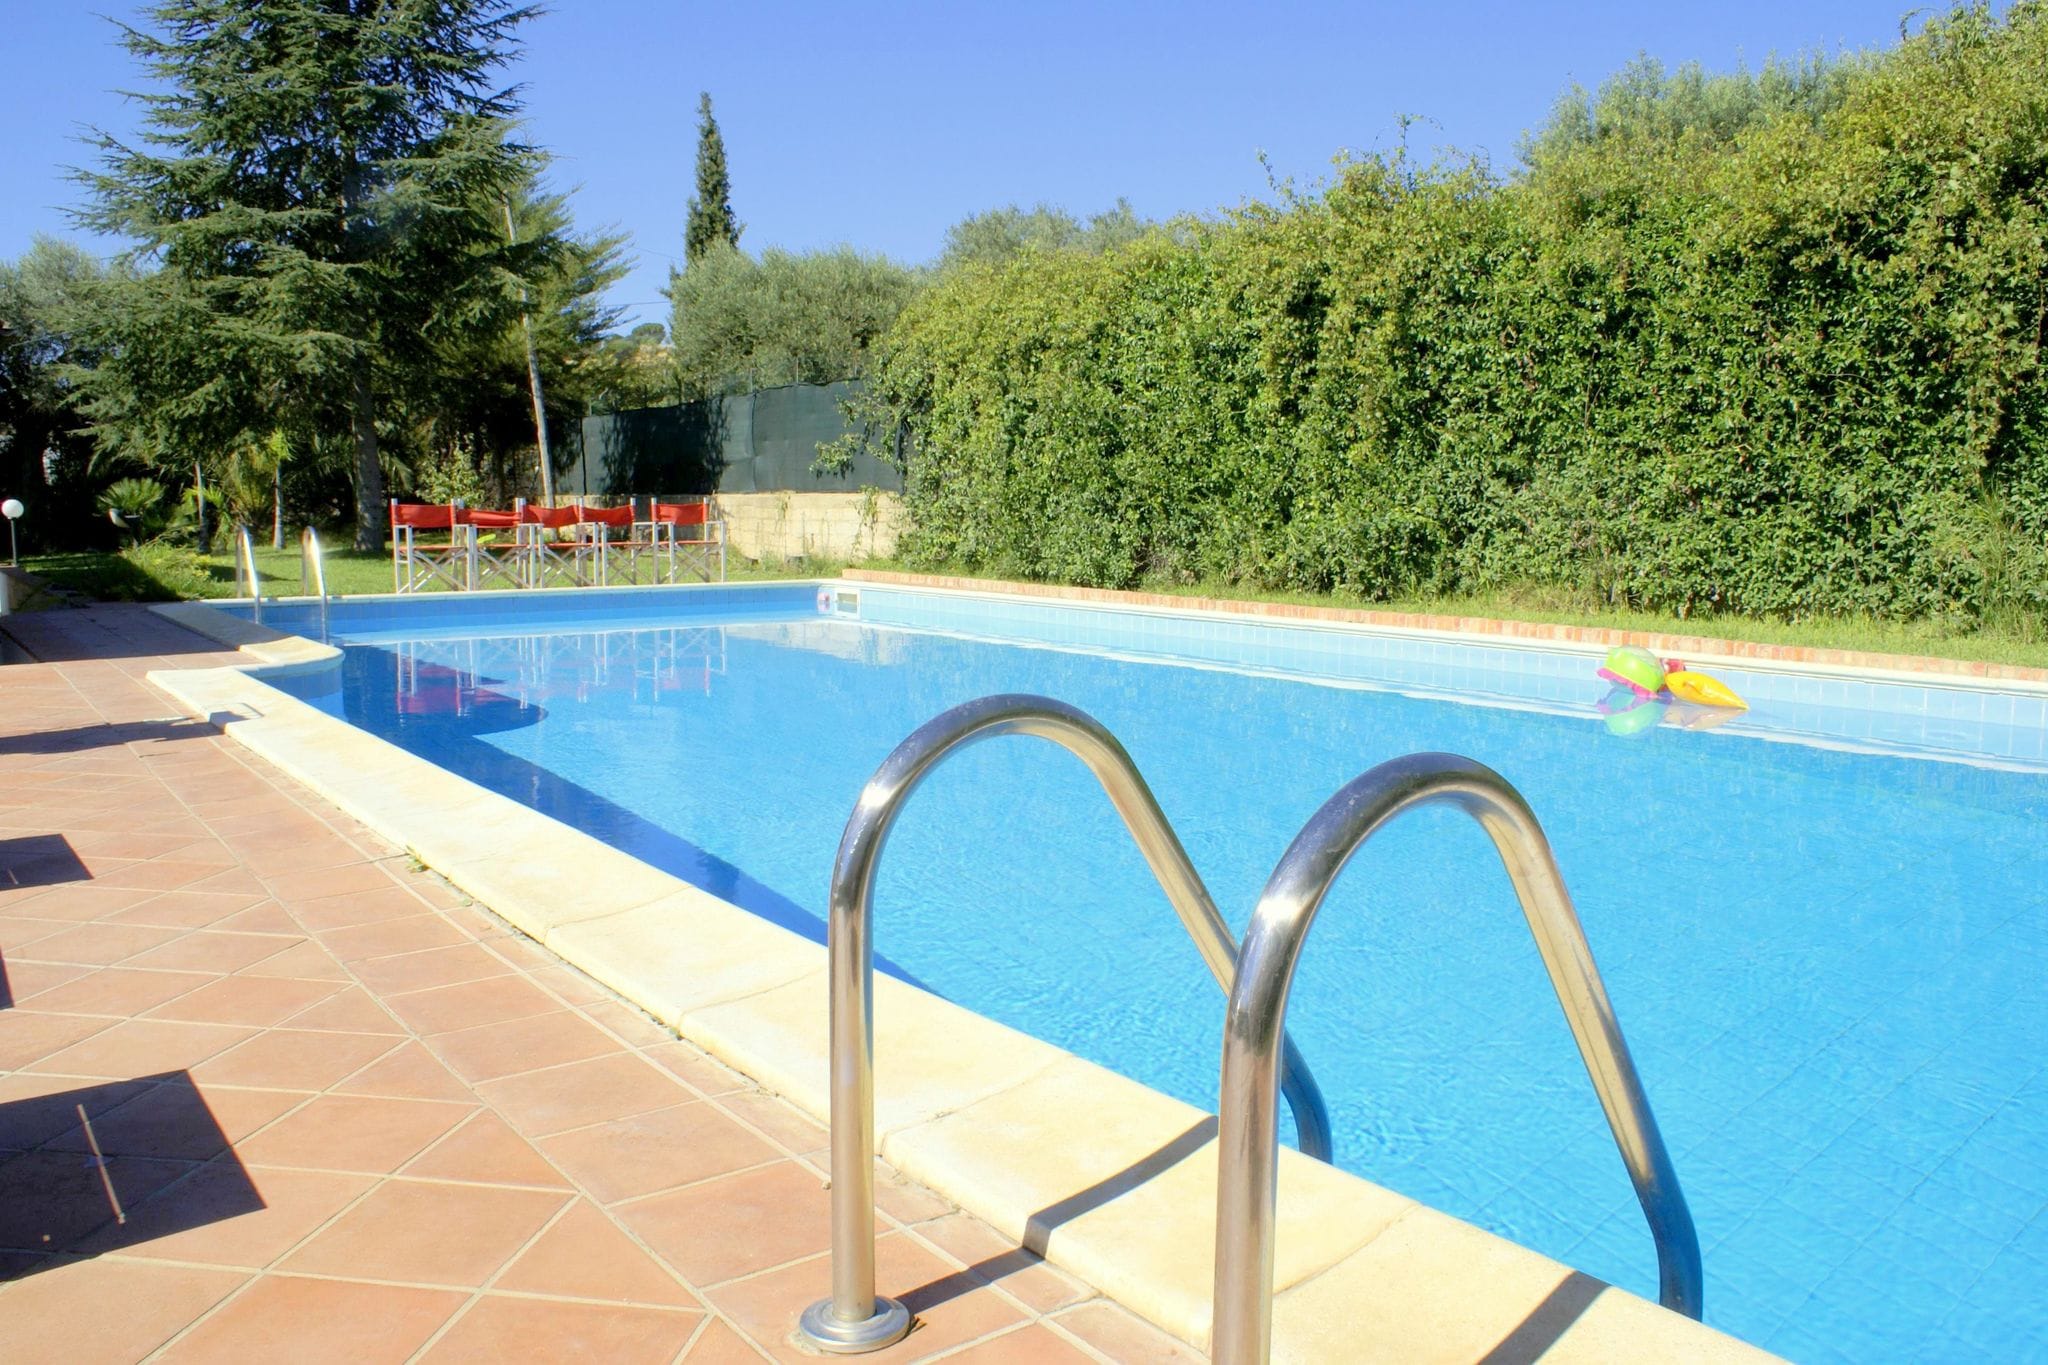 Modern Villa in Caltagirone Italy with Private Pool